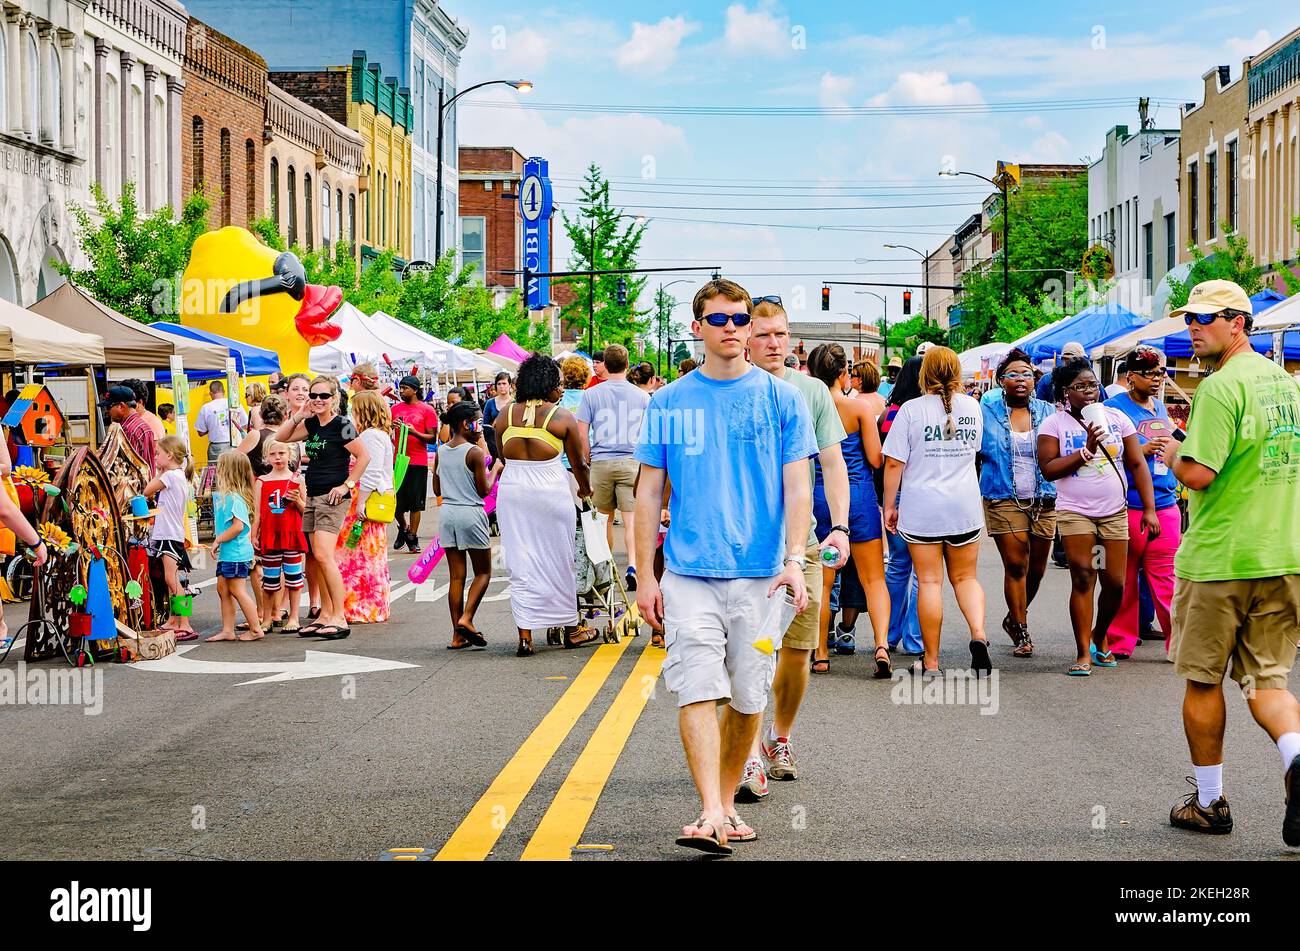 People walk past street vendors during the Market Street Festival, May 5, 2012, in Columbus, Mississippi. Stock Photo